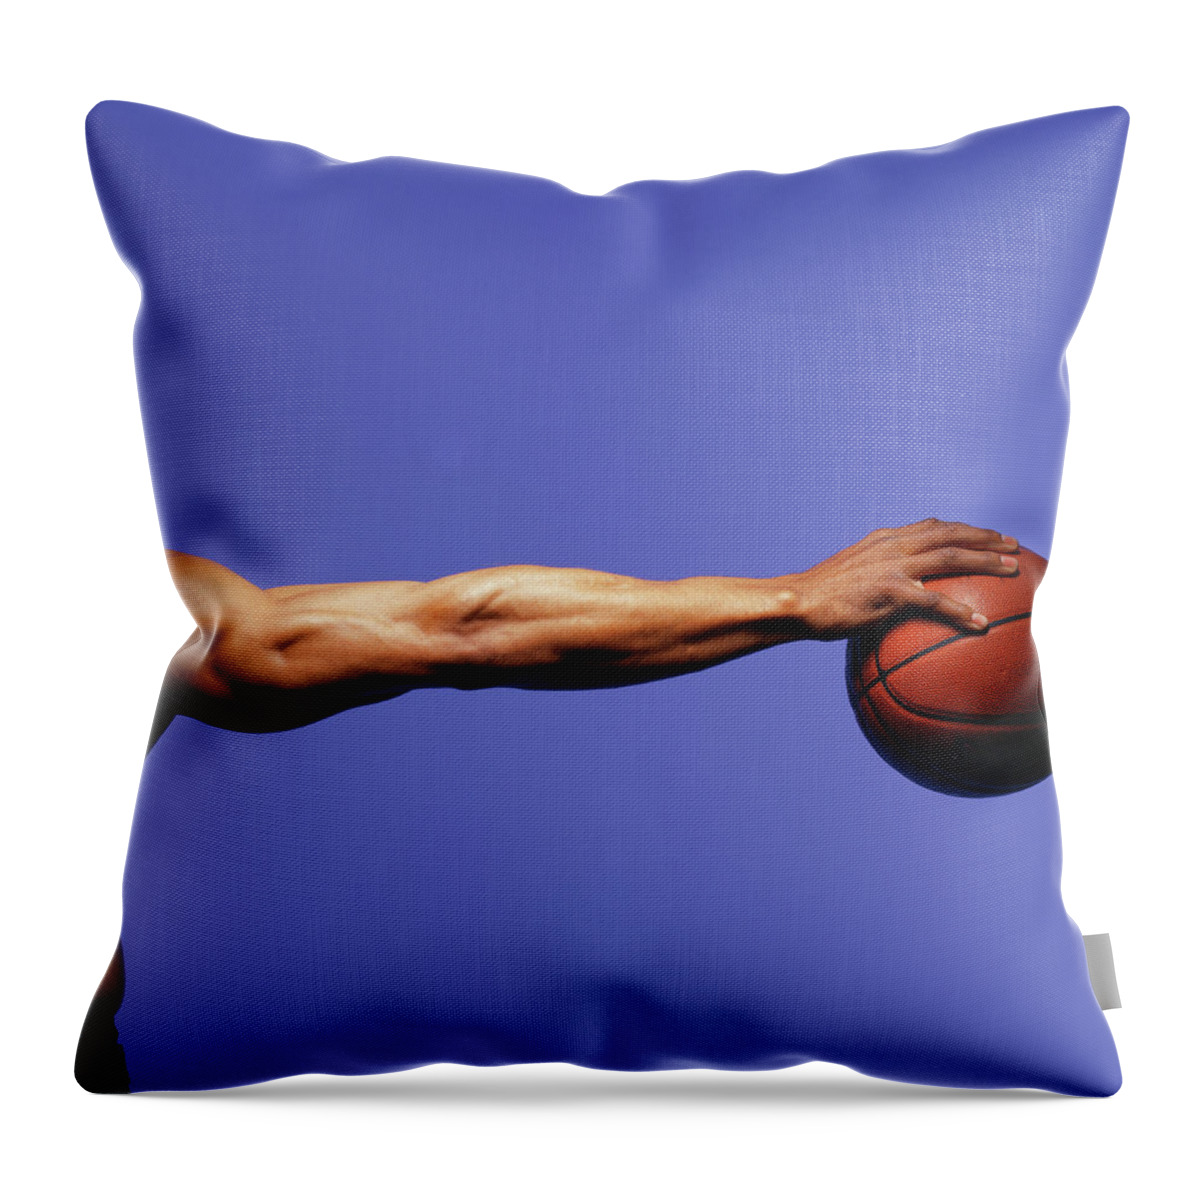 Human Arm Throw Pillow featuring the photograph Man Palming Basketball, Close-up Of Arm by Blaise Hayward